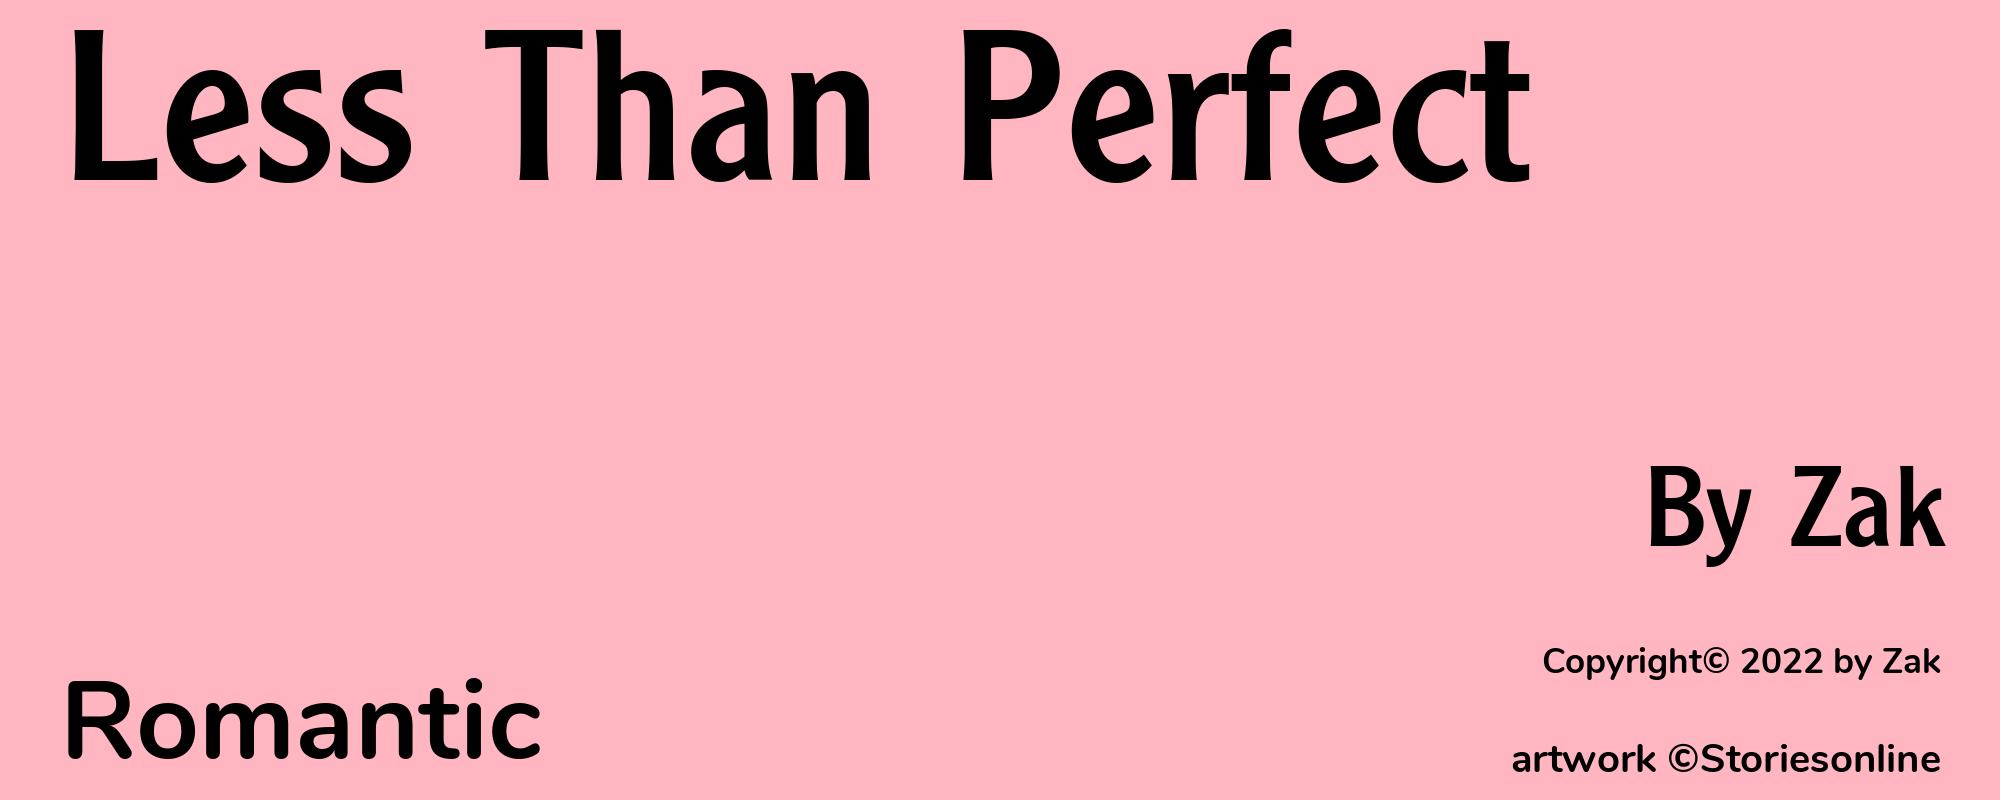 Less Than Perfect - Cover